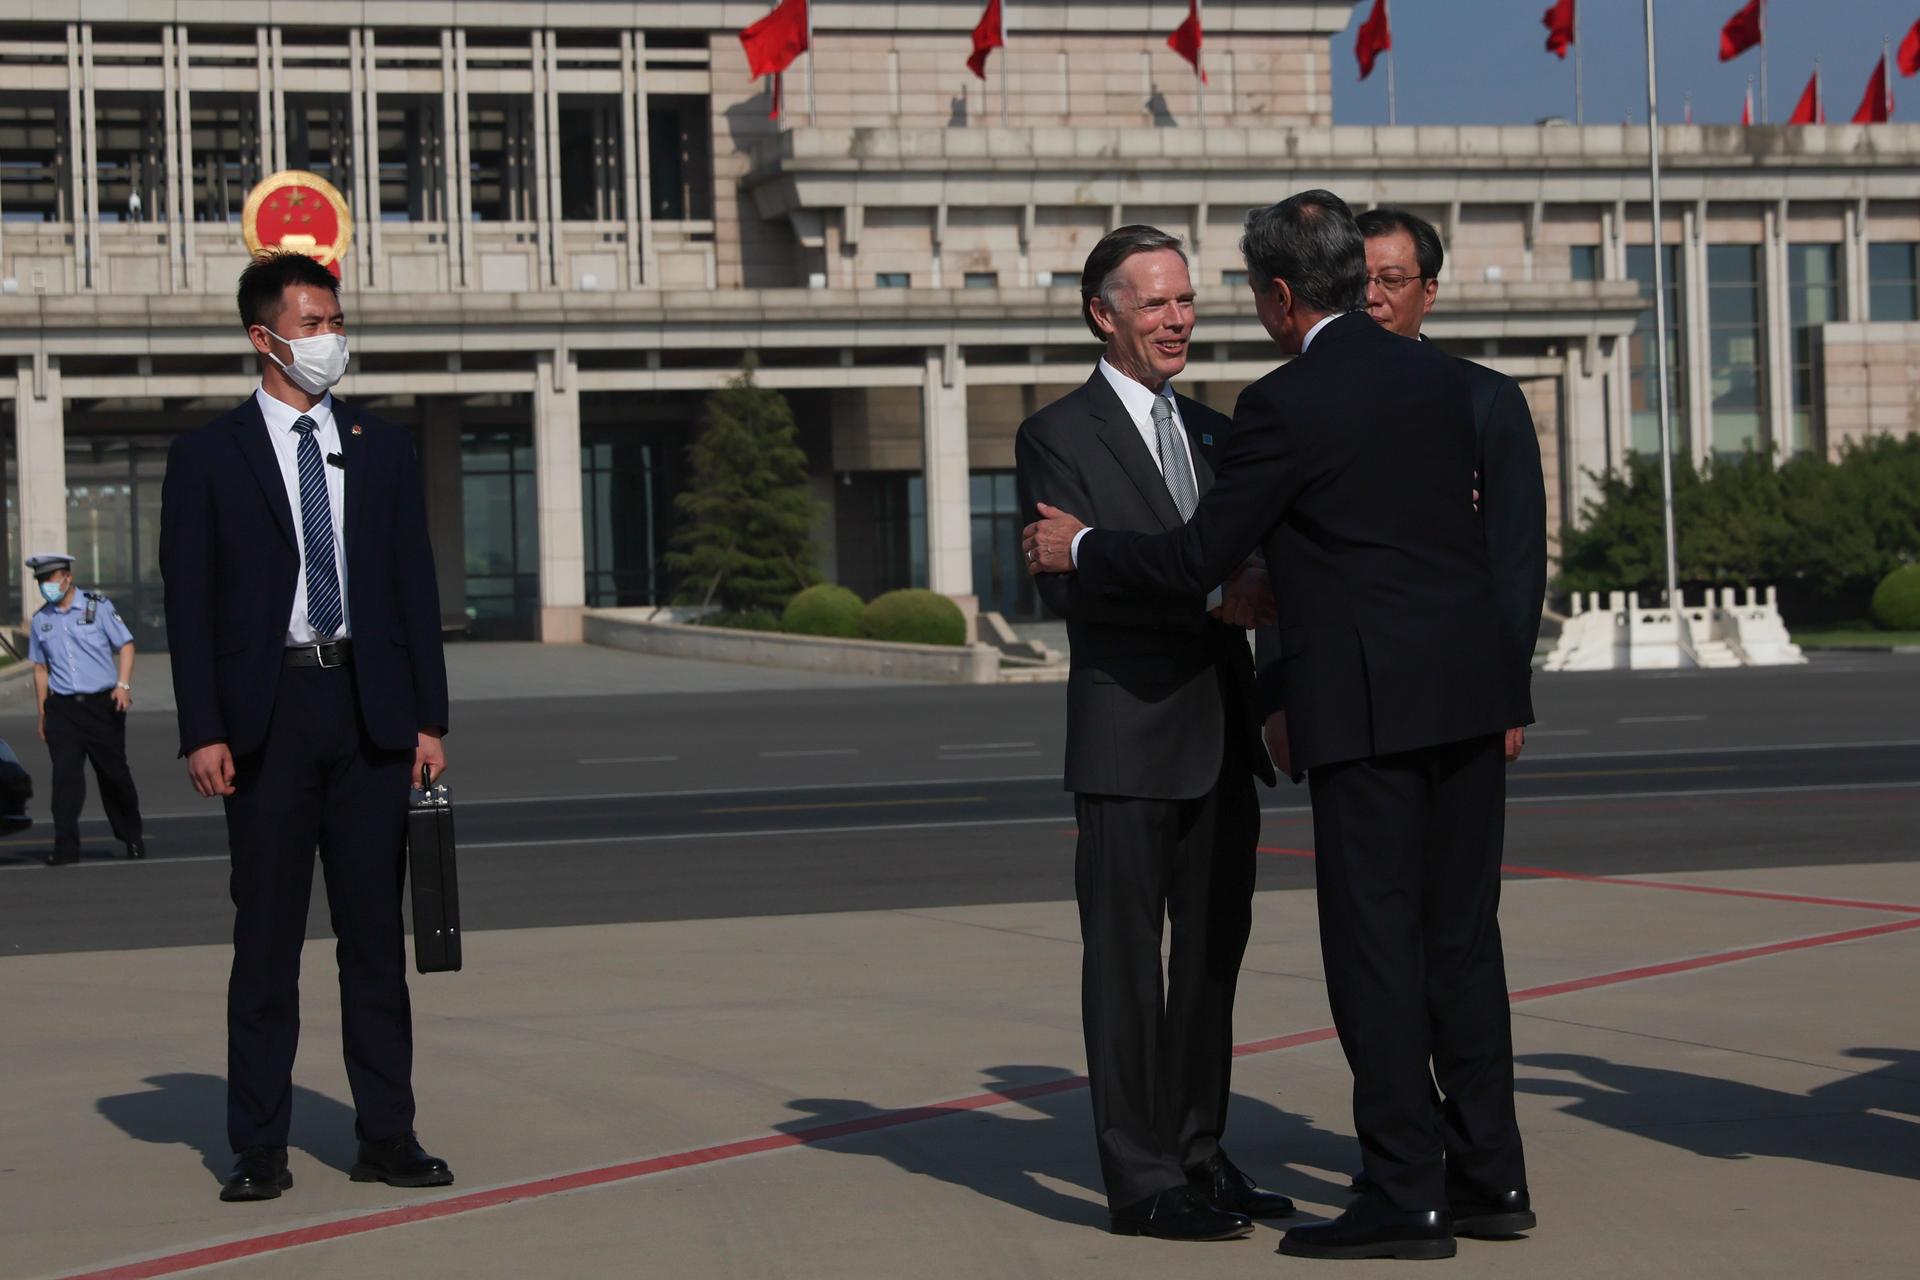 three diplomats shake hands in front of an embassy building